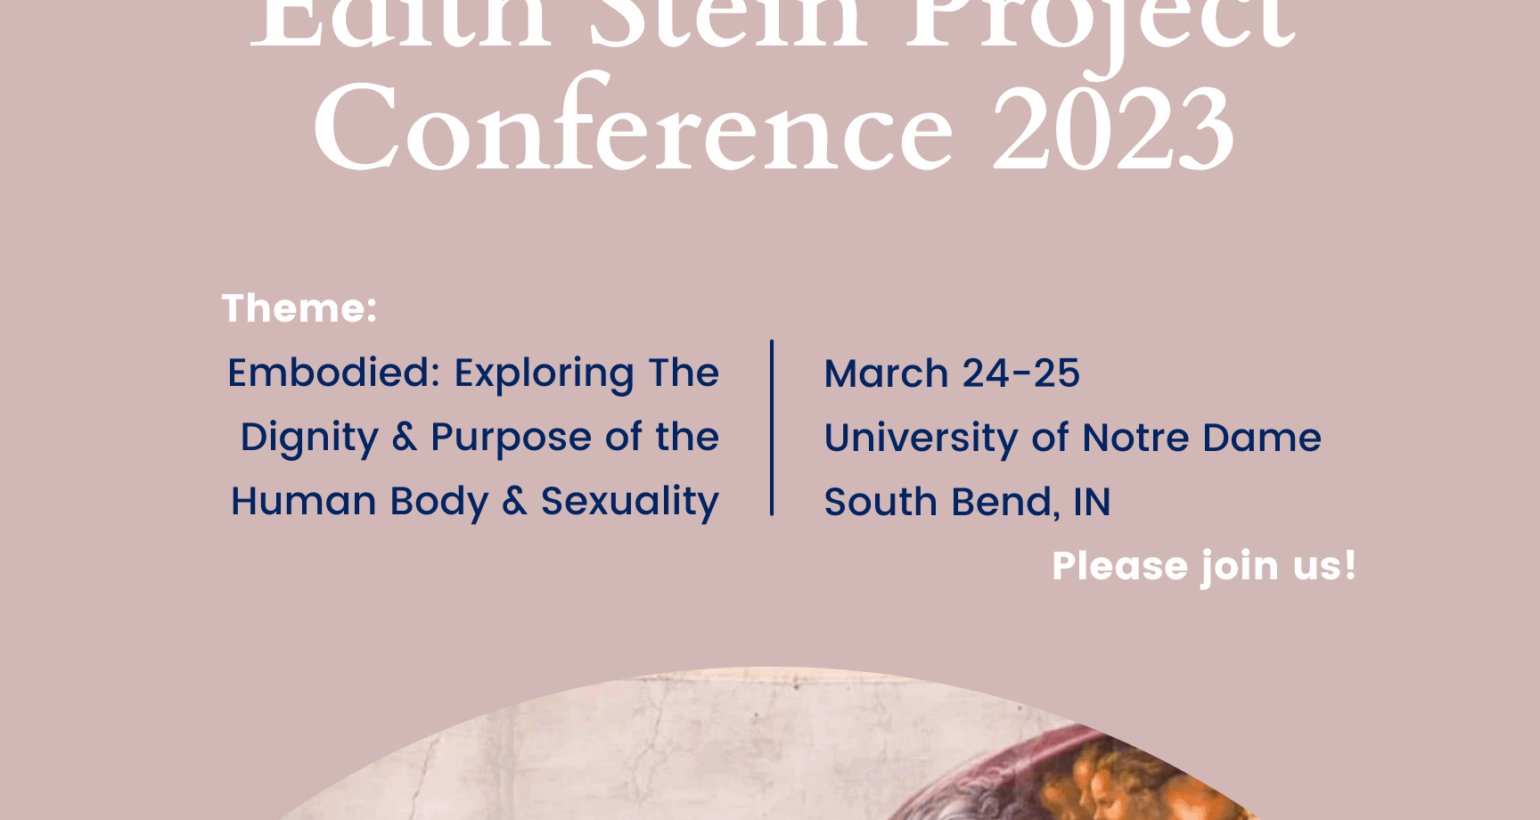 Edith Stein Project 2023 Conference